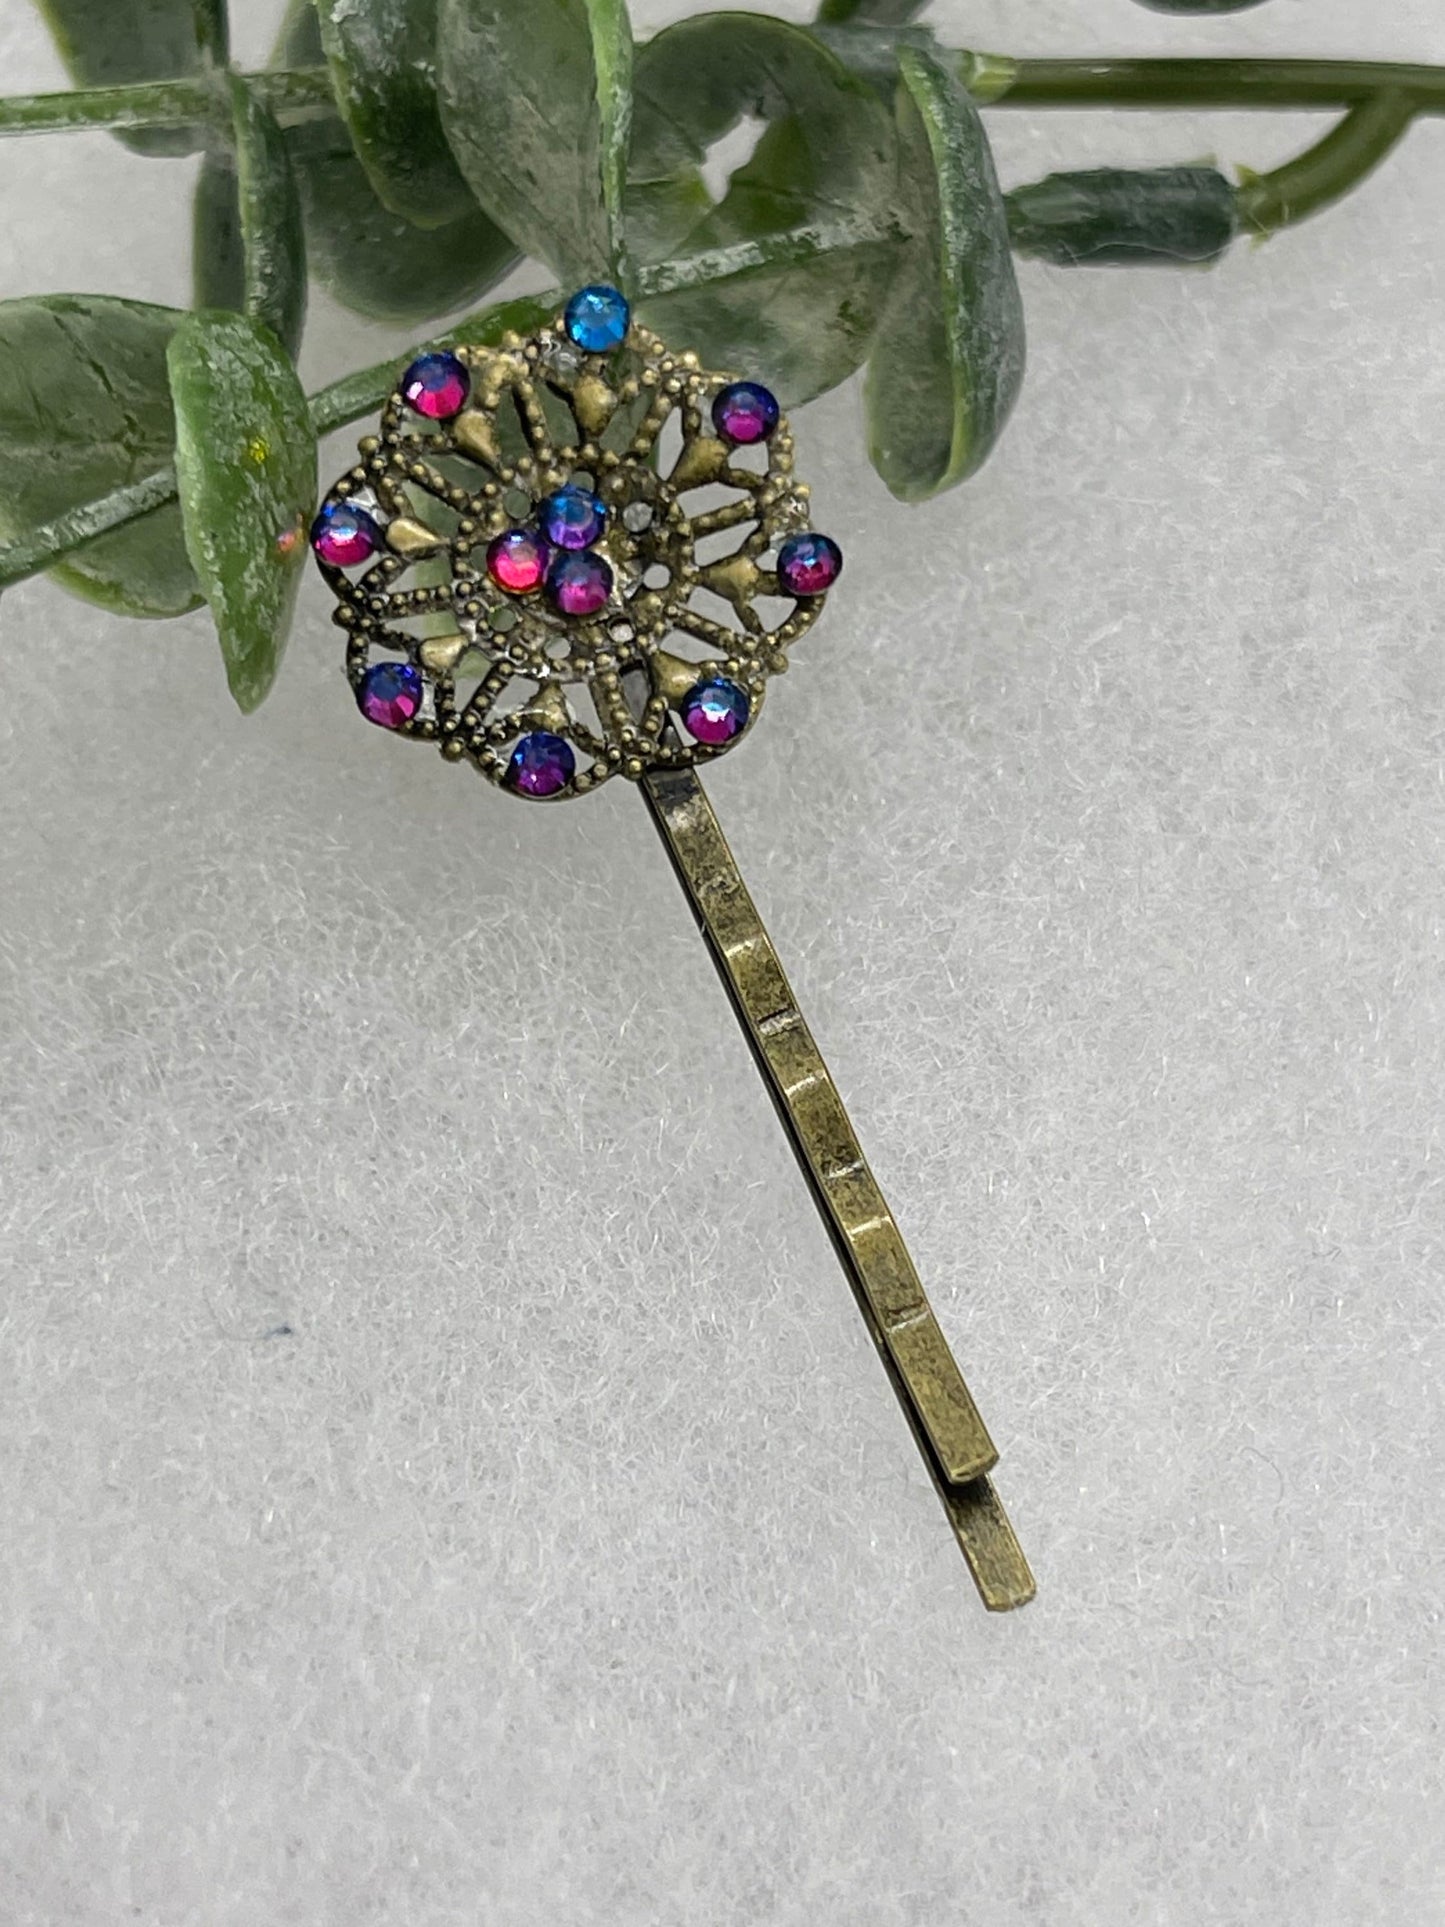 Blue flame crystal Antique vintage Style approximately 2.5” flower hair pin wedding engagement bride princess formal hair accessory